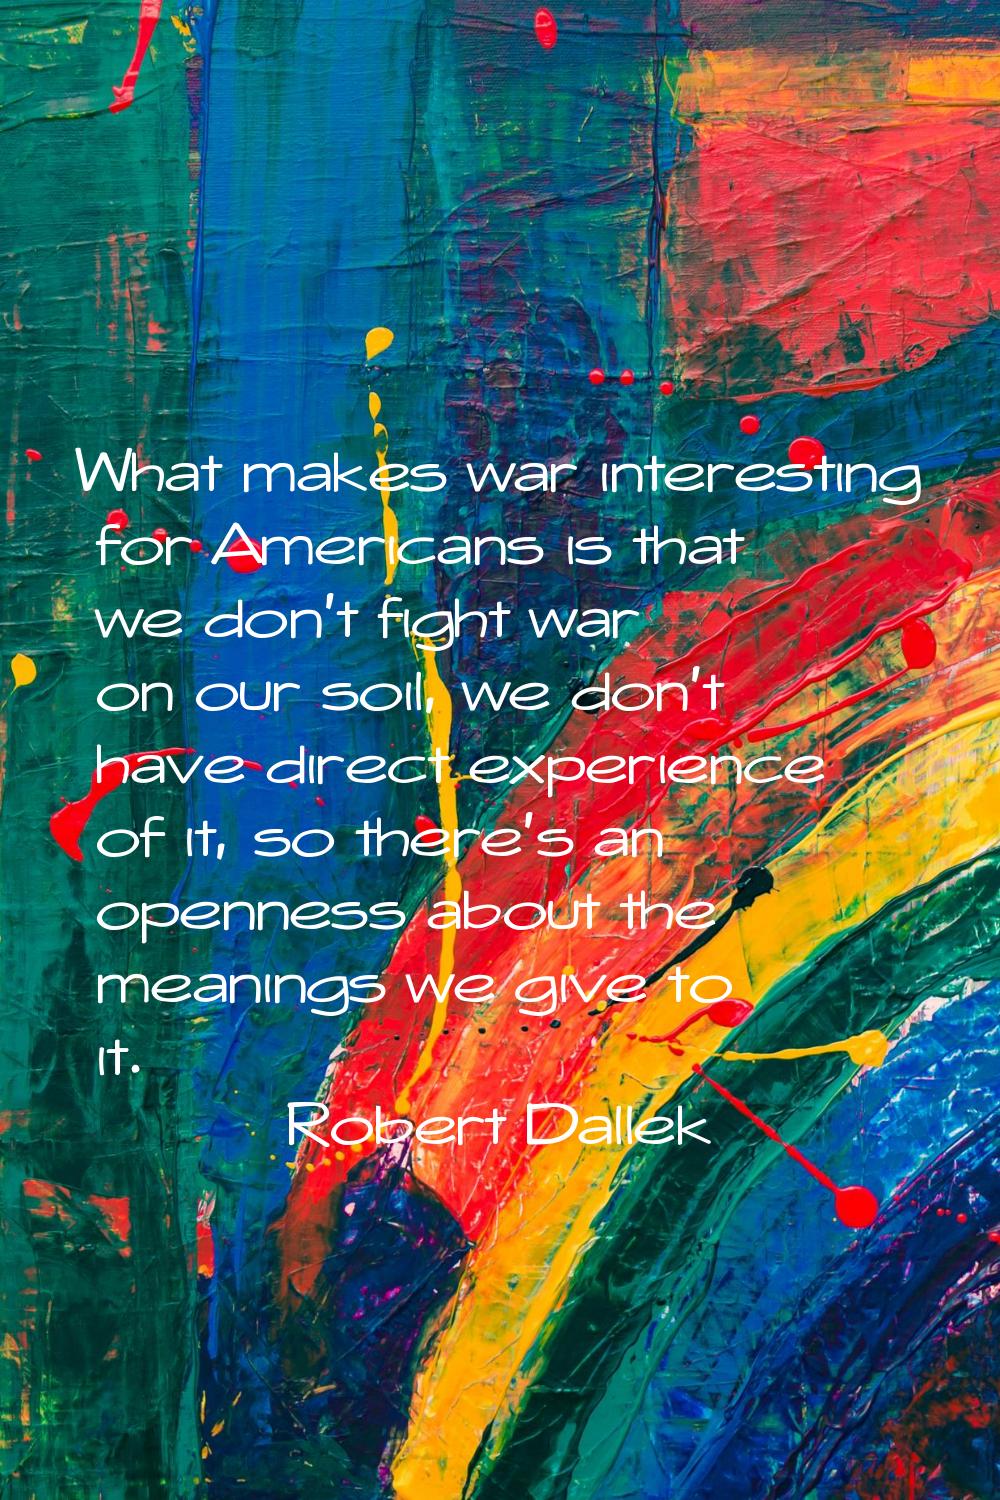 What makes war interesting for Americans is that we don't fight war on our soil, we don't have dire